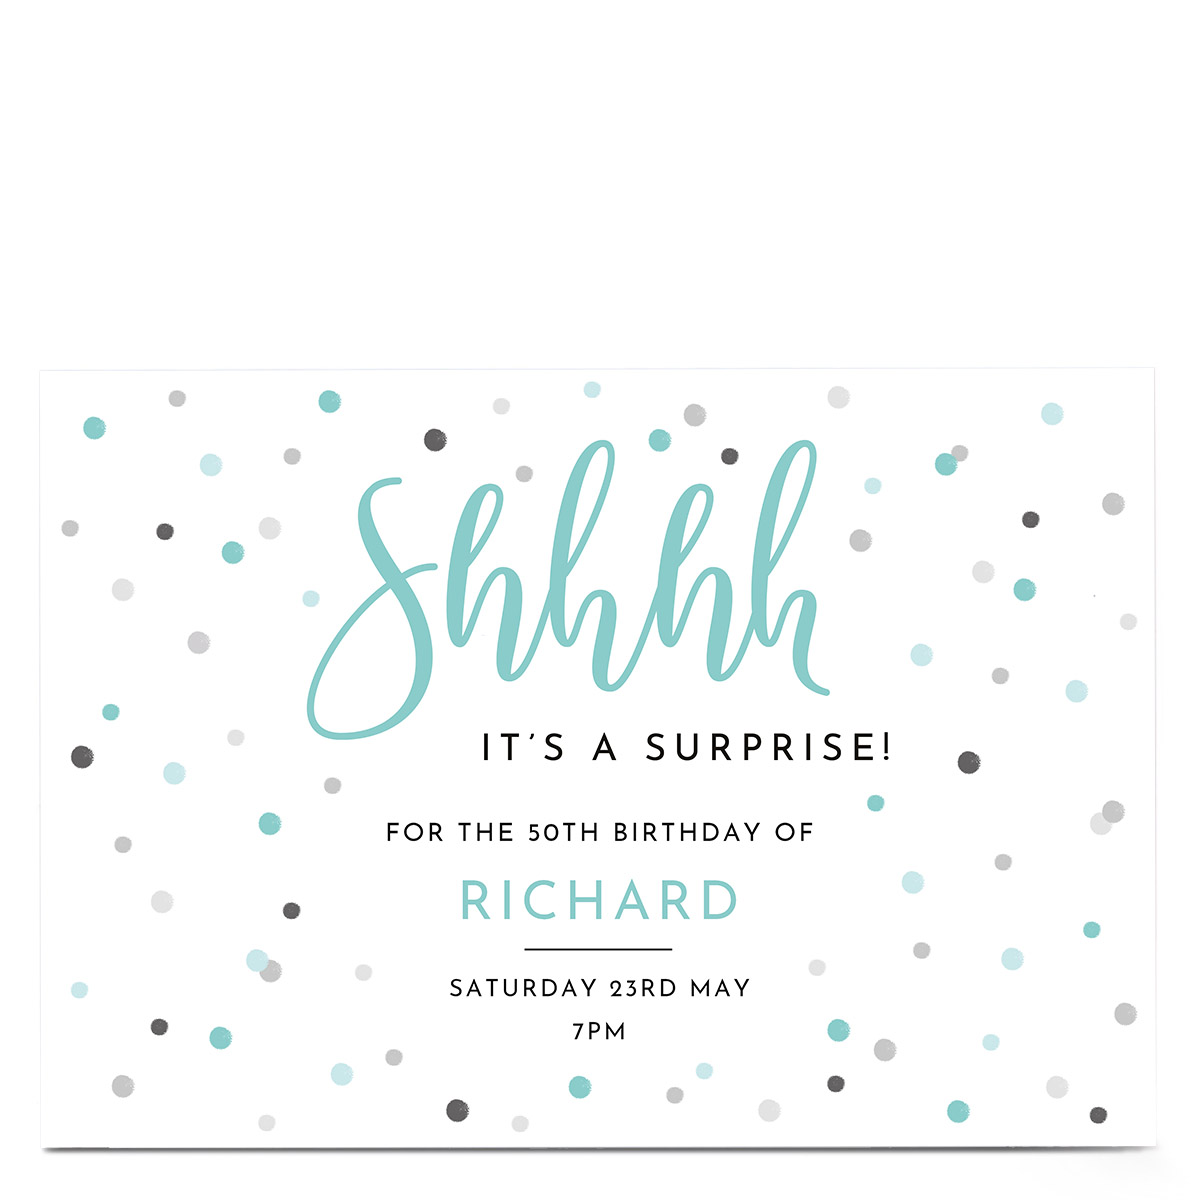 Personalised Birthday Invitation - It's A Surprise